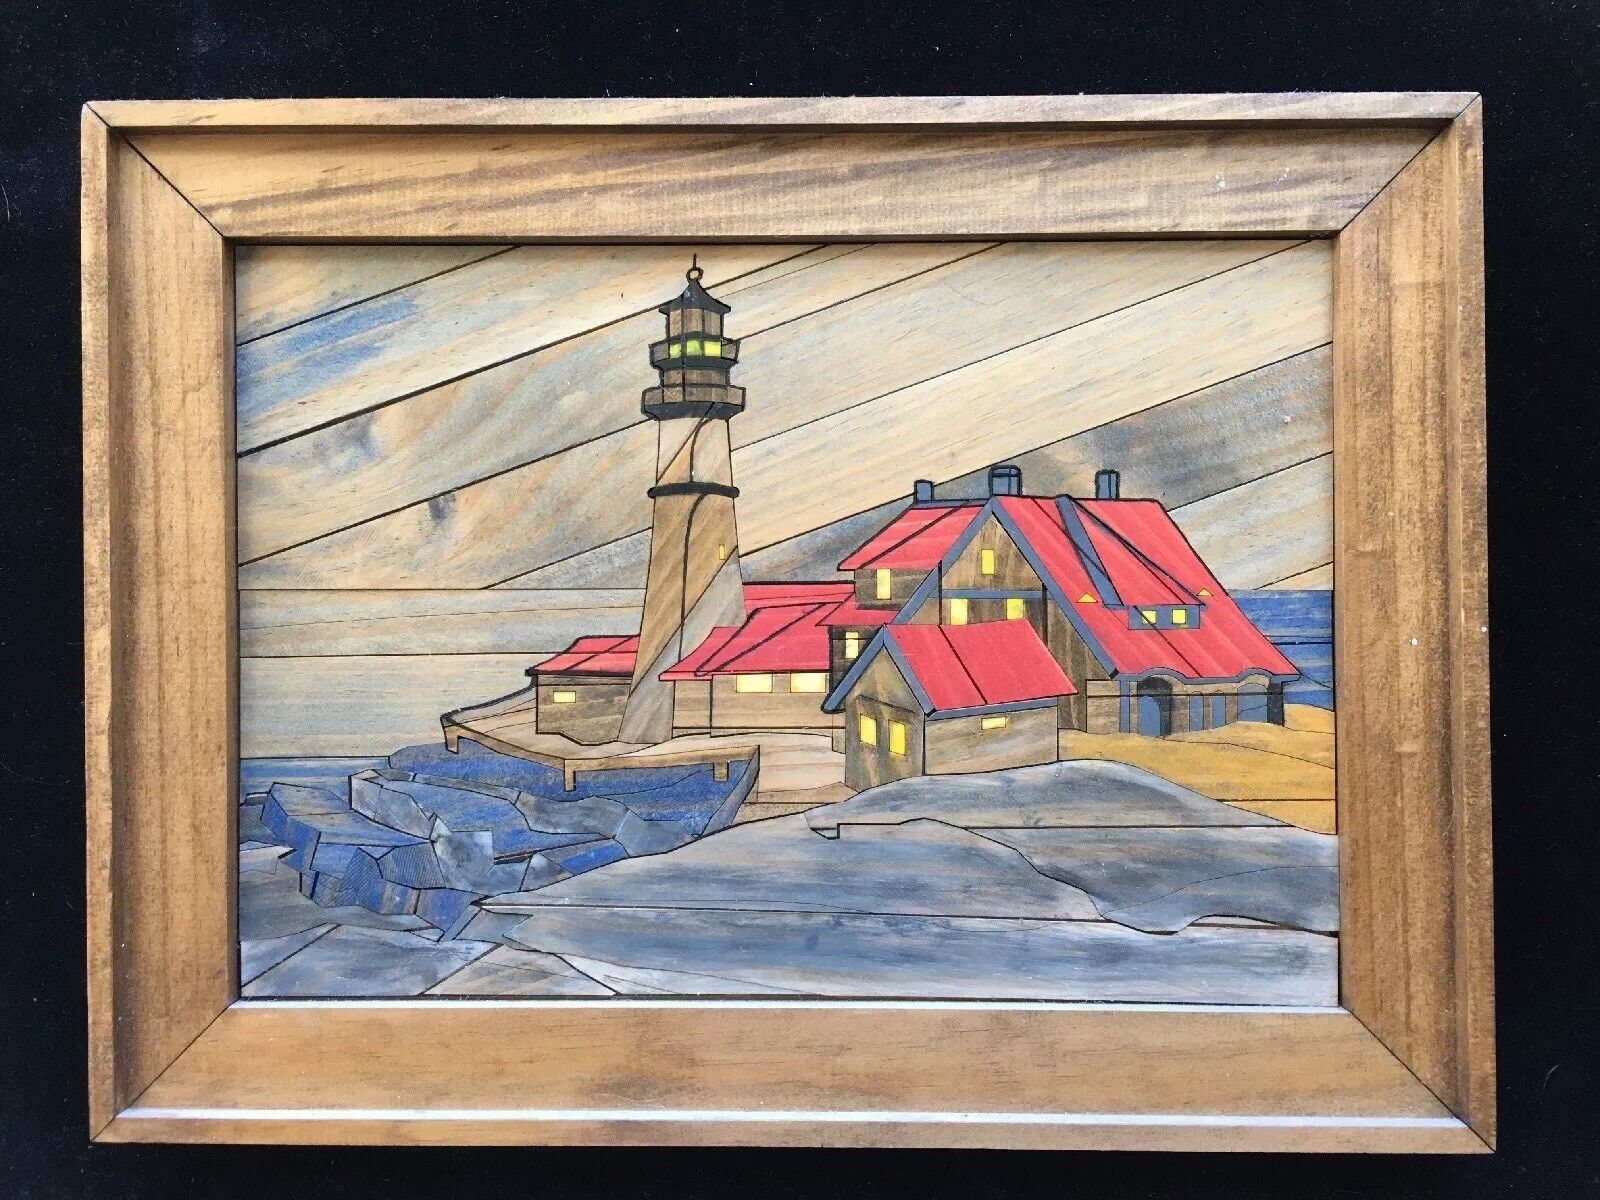 16”x11” Lighthouse & Cabin Wood Carved Puzzled picture sculpture art